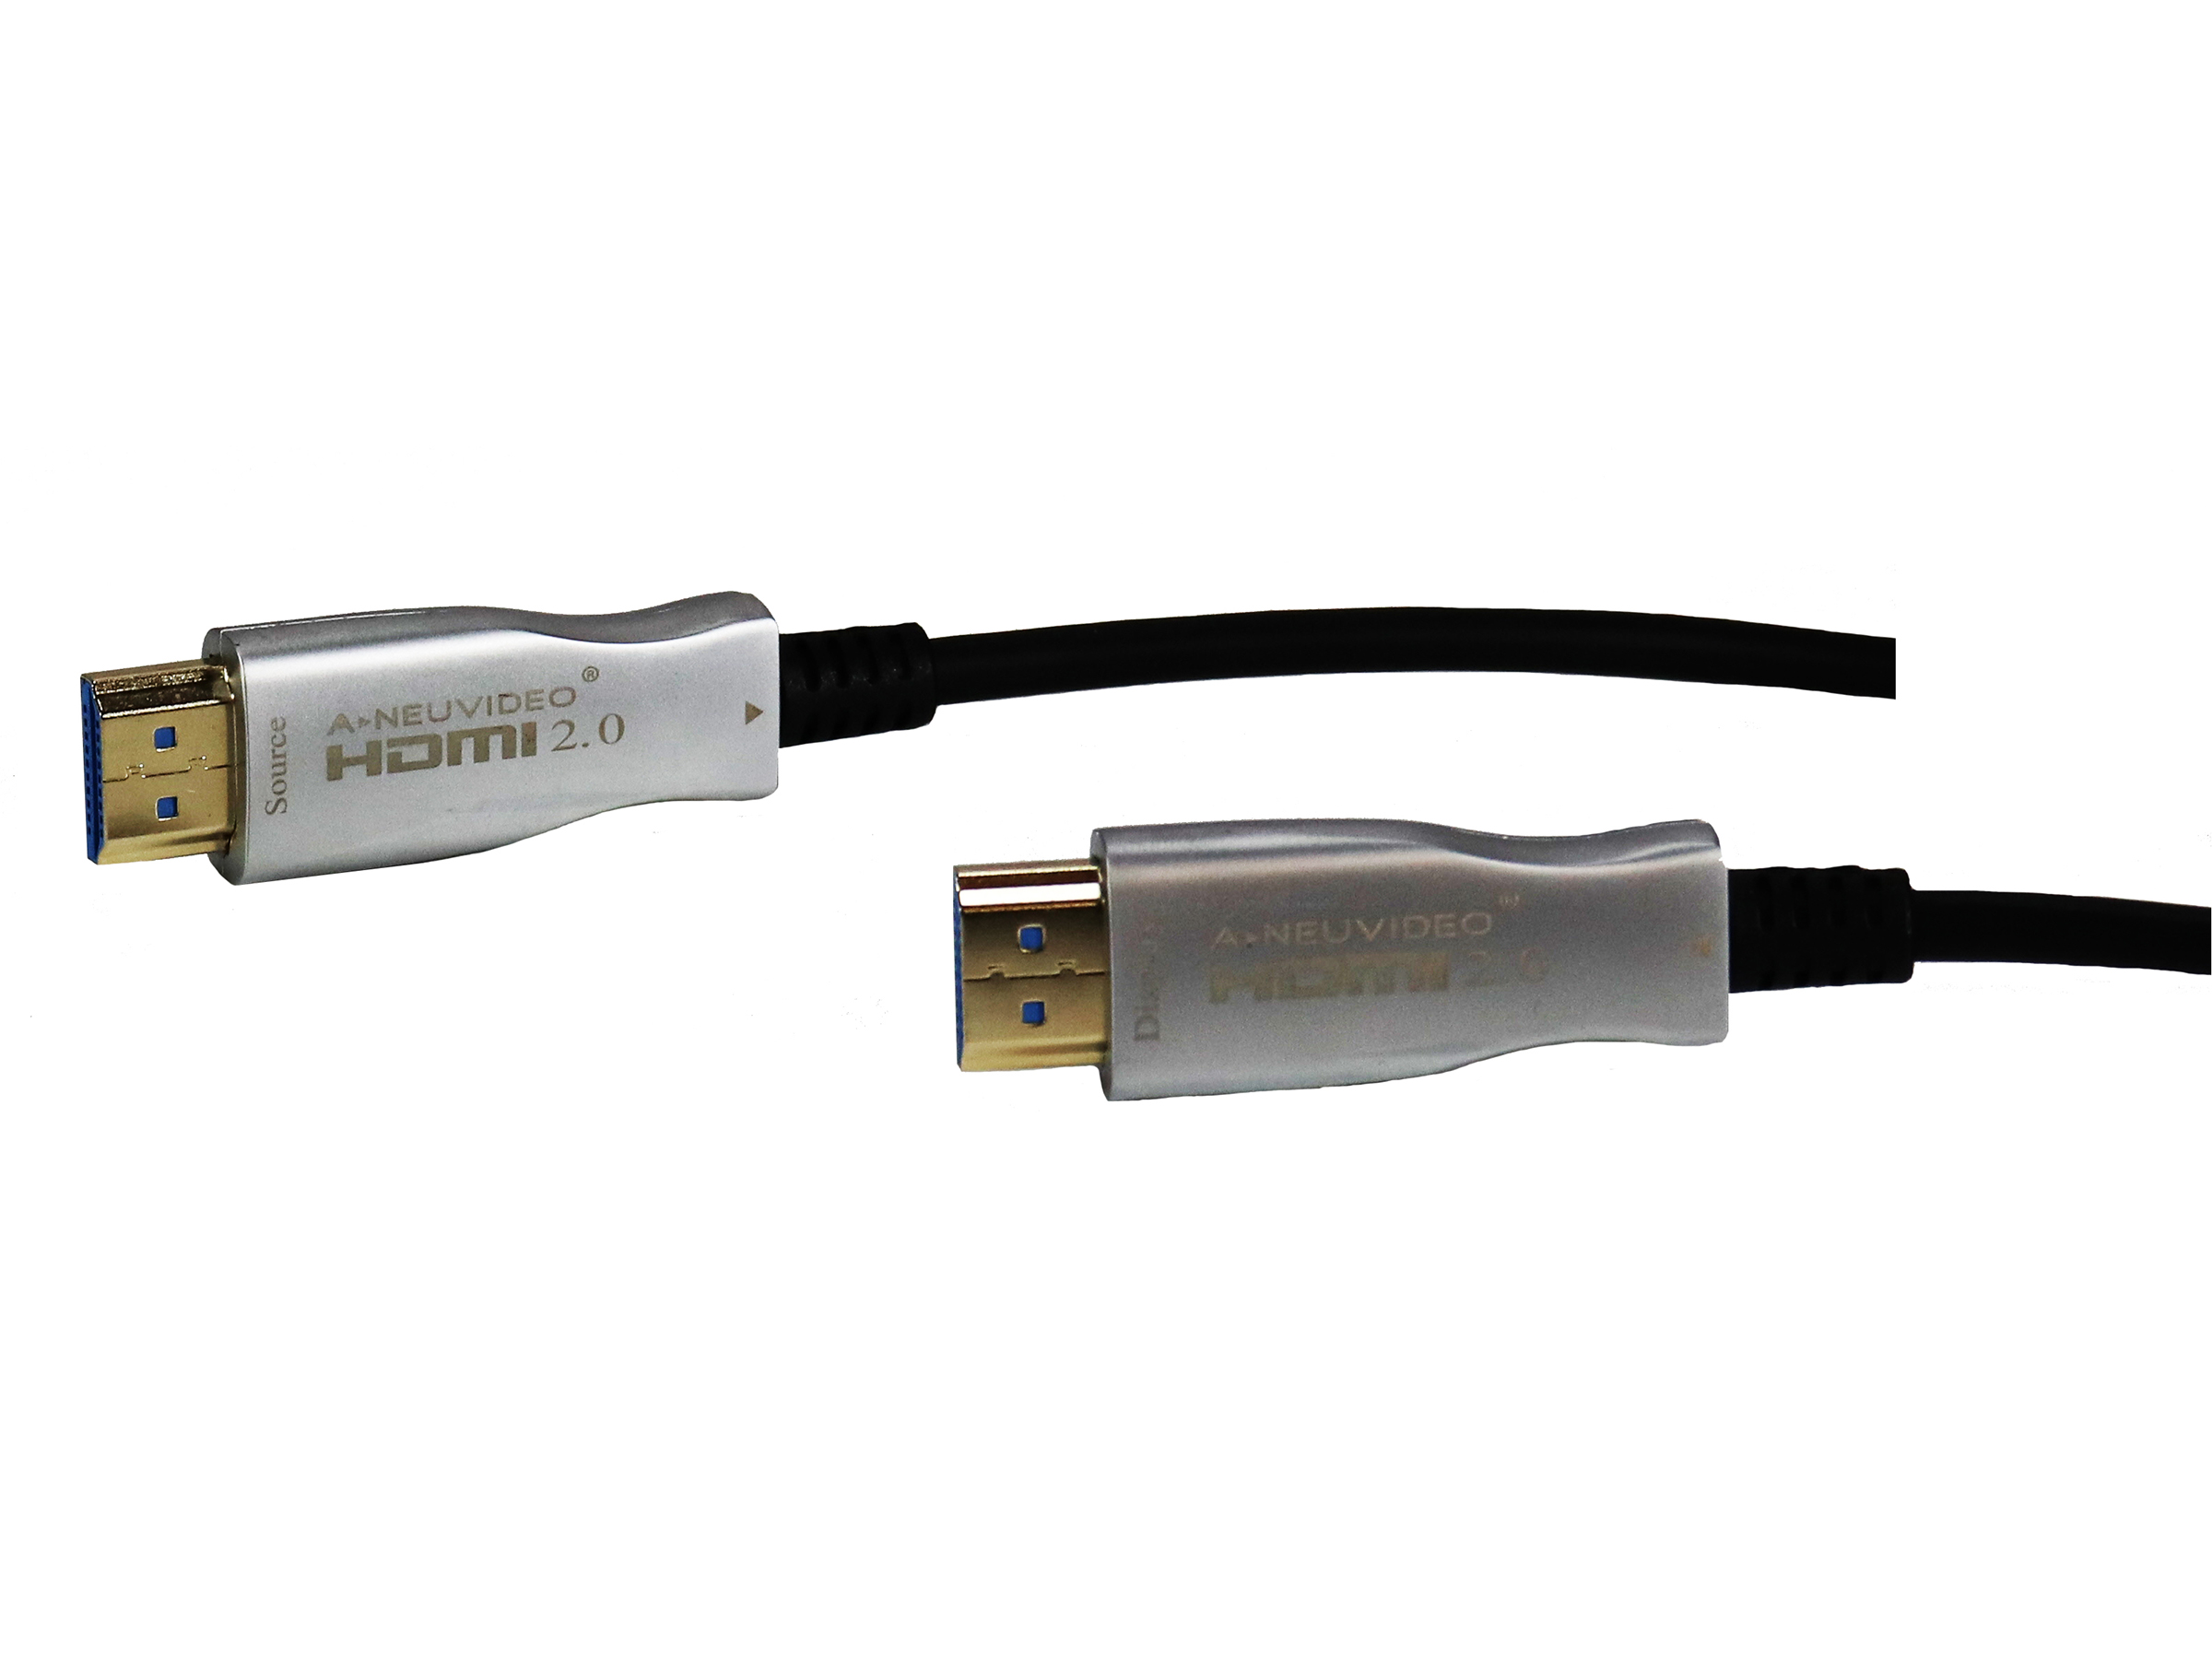 ANI-AOC-80 Fiber Optic Hdmi Active Optical Cable - 80m/262ft by A-NeuVideo